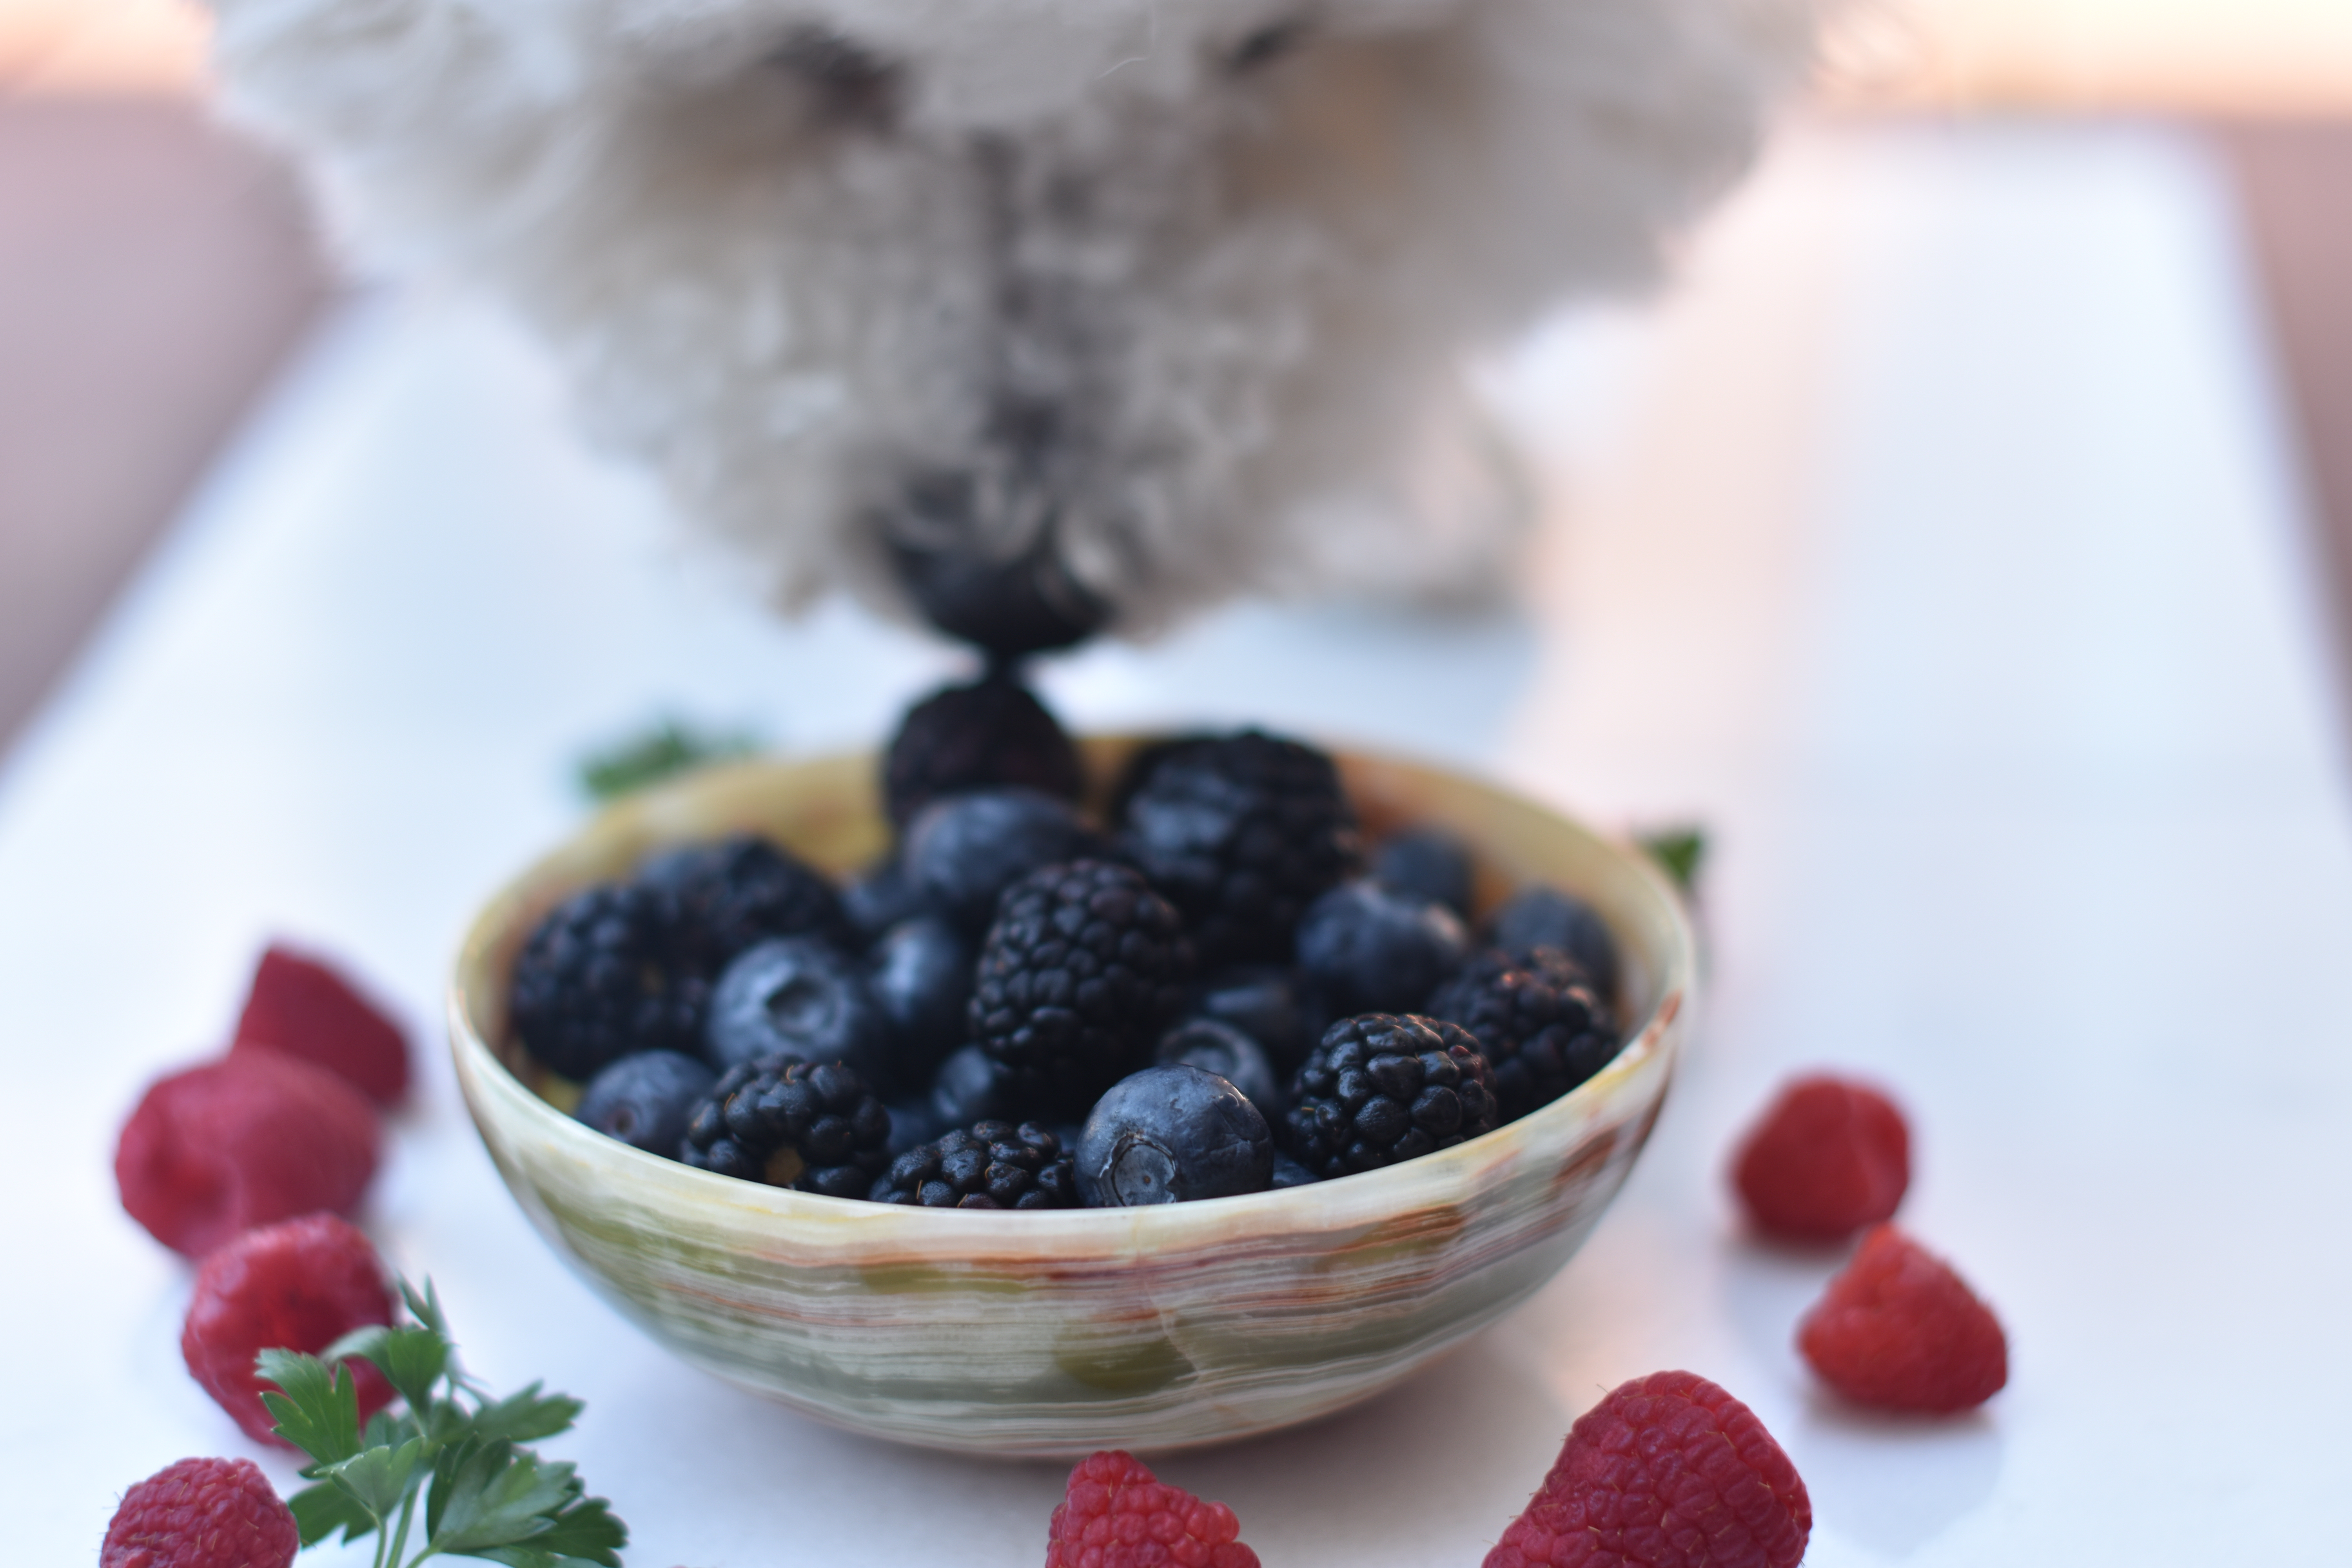 Bichon with cancer-fighting Berries